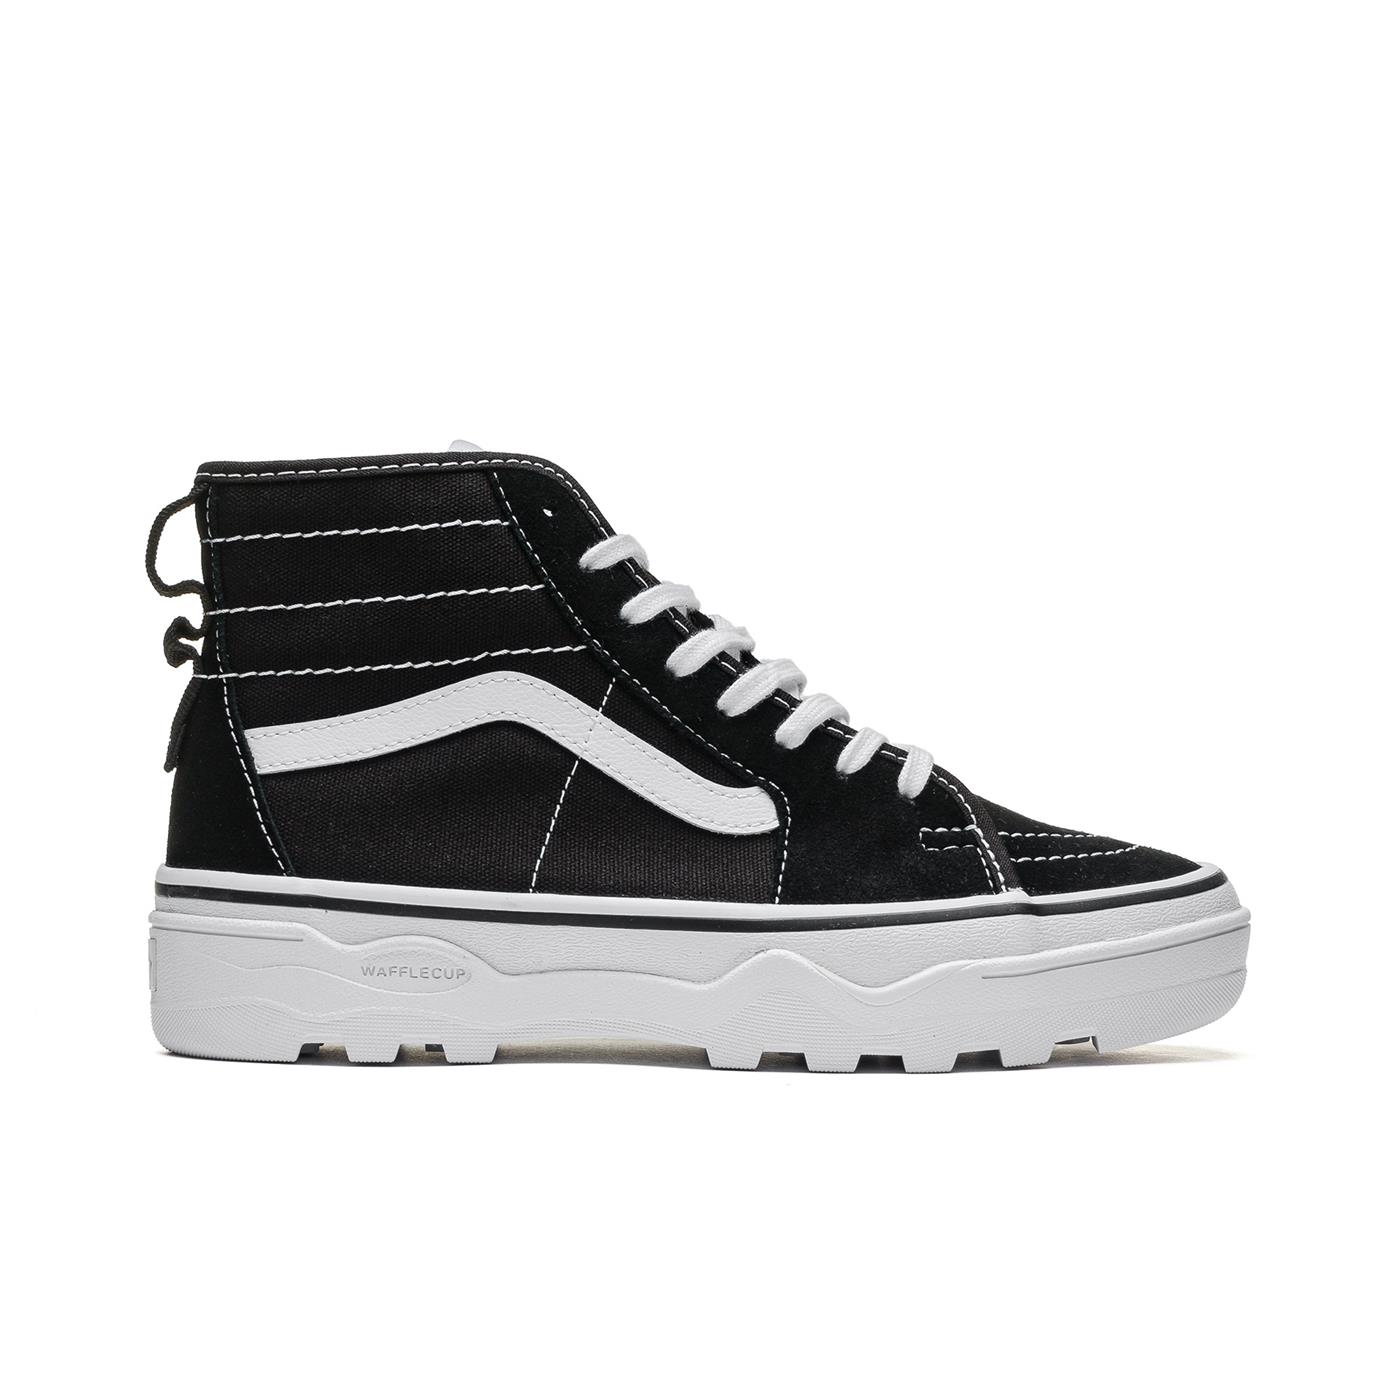 Sneakers VANS Sentry SK8-Hi WC Black for Woman | VN0A5KY5BA21 | XTREME.PT